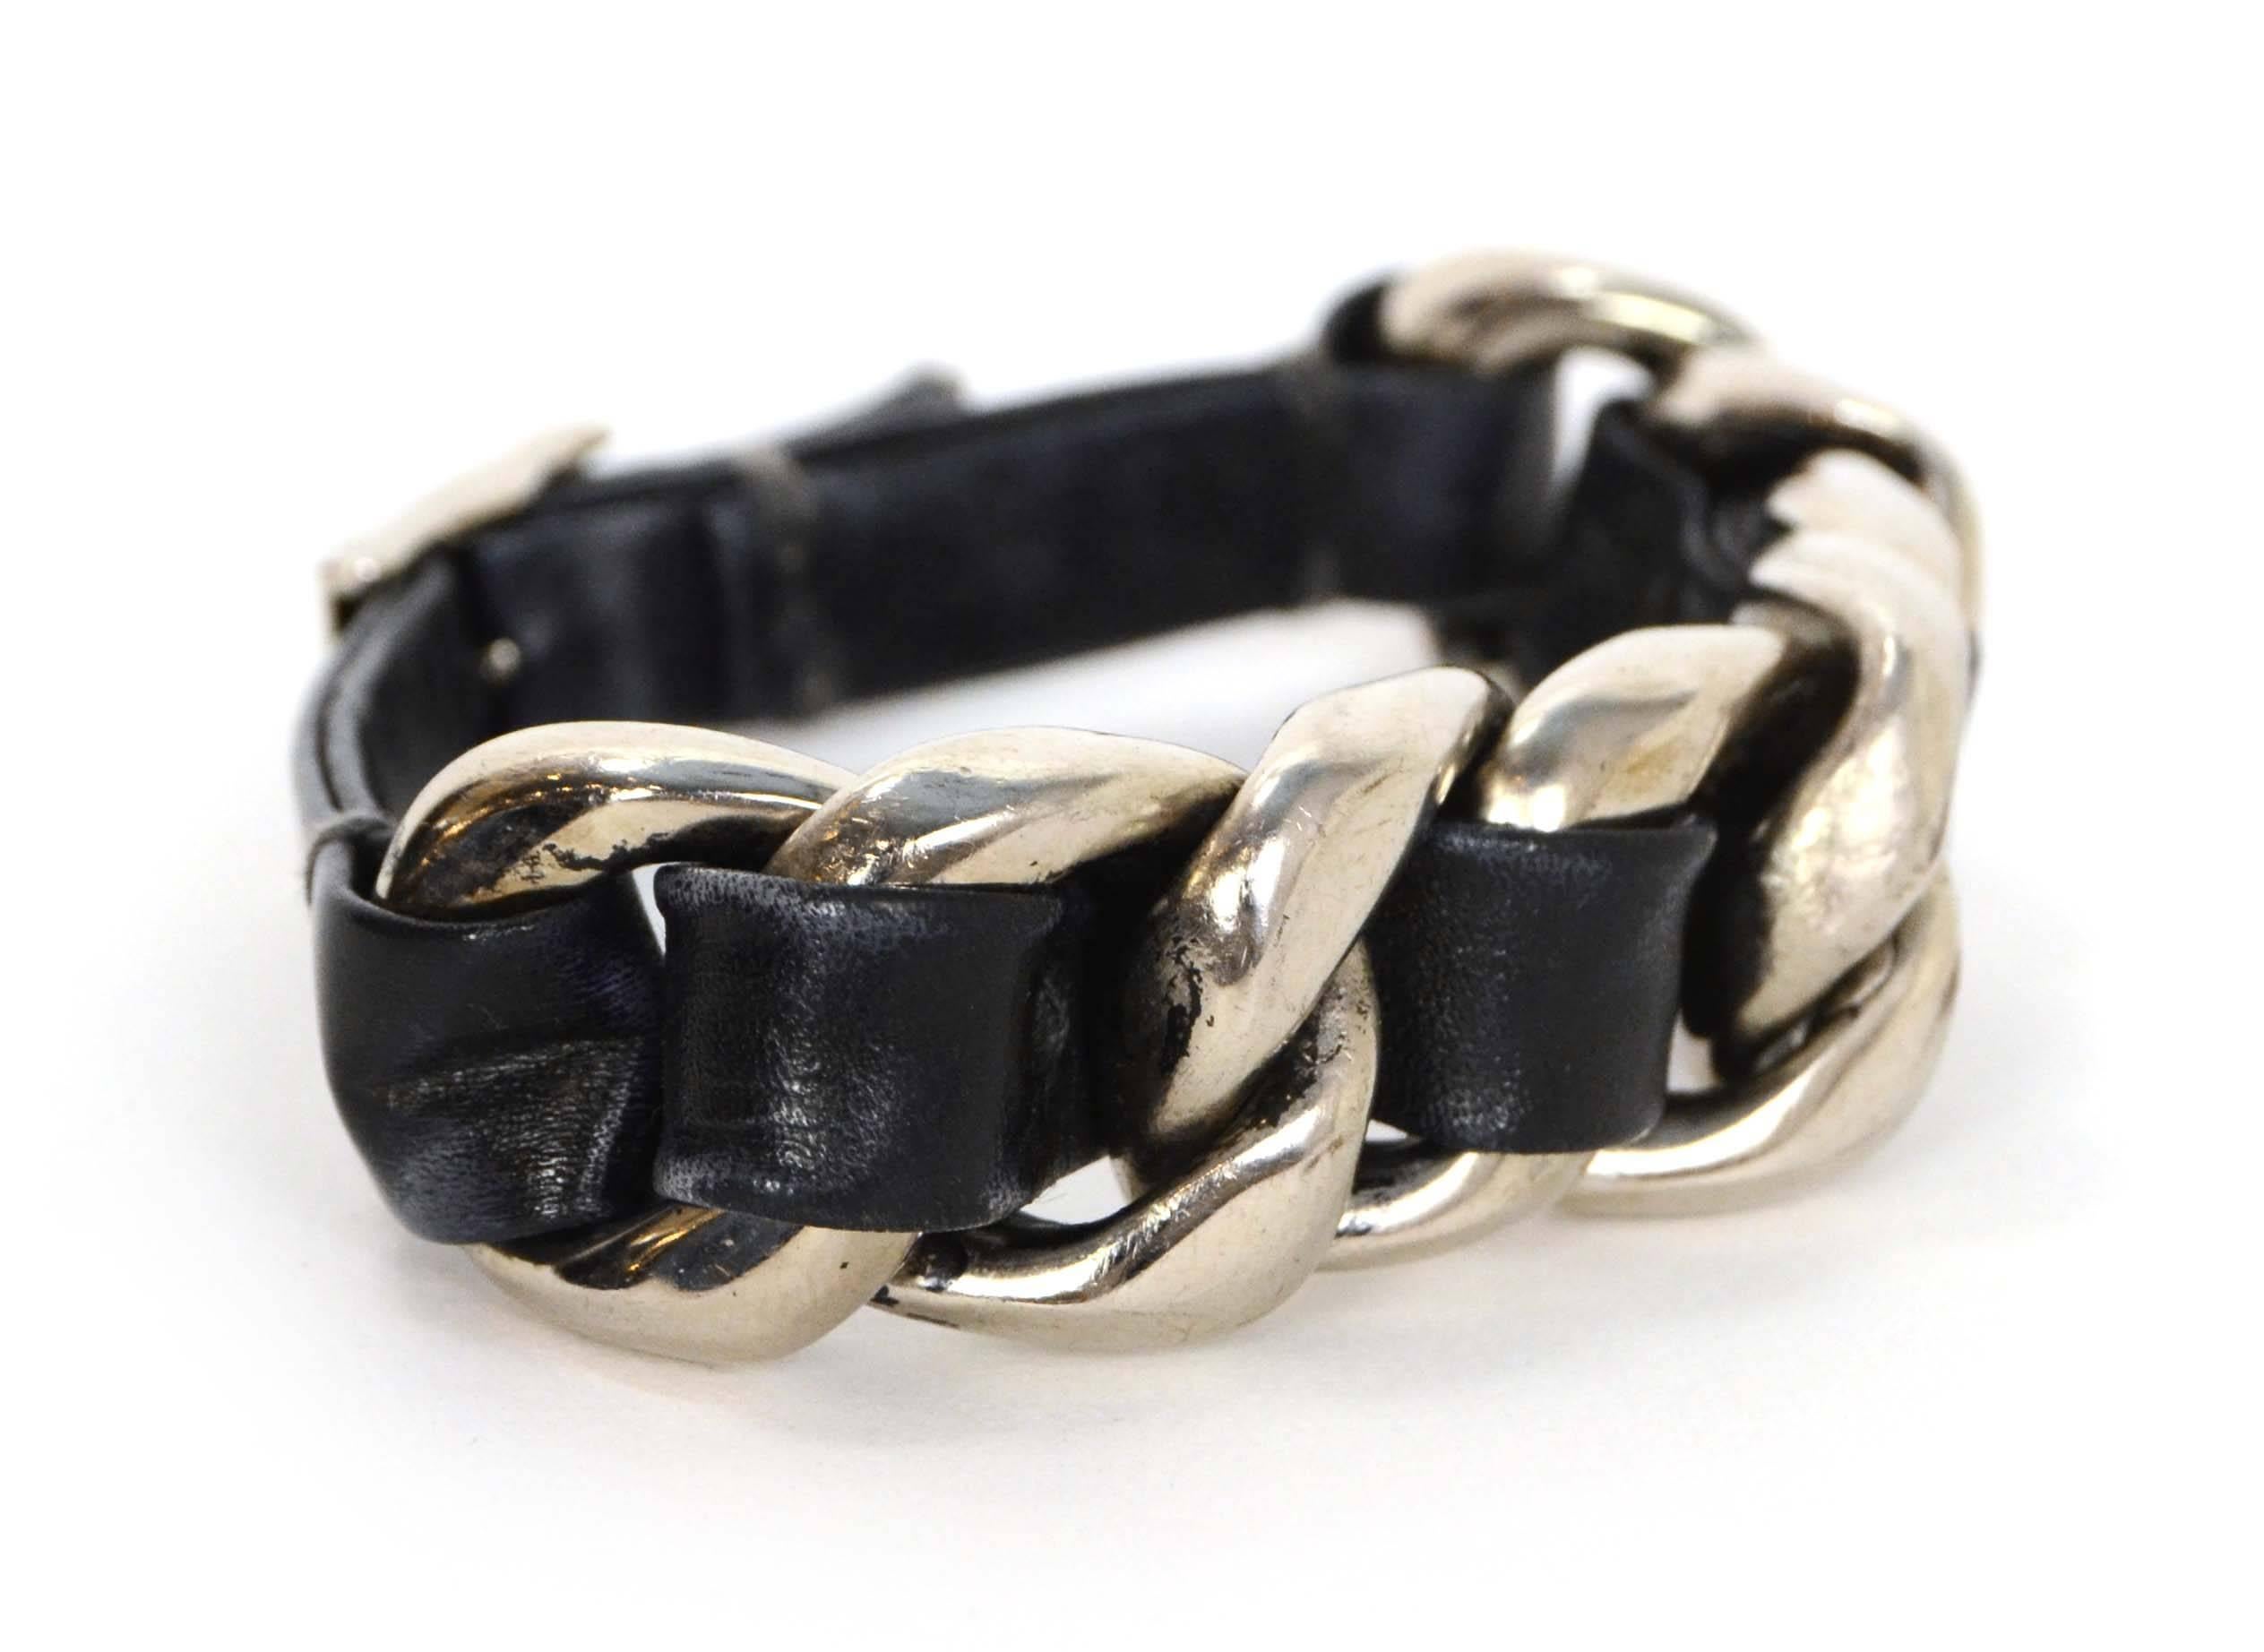 Chanel Leather Woven Chain Link Bracelet 
Features small silvertone CC pendant at closure
Made In: Italy
Year of Production: 2002
Color: Black and silvertone
Materials: Leather and metal
Closure: Buckle and notch closure
Stamp: 02 CC